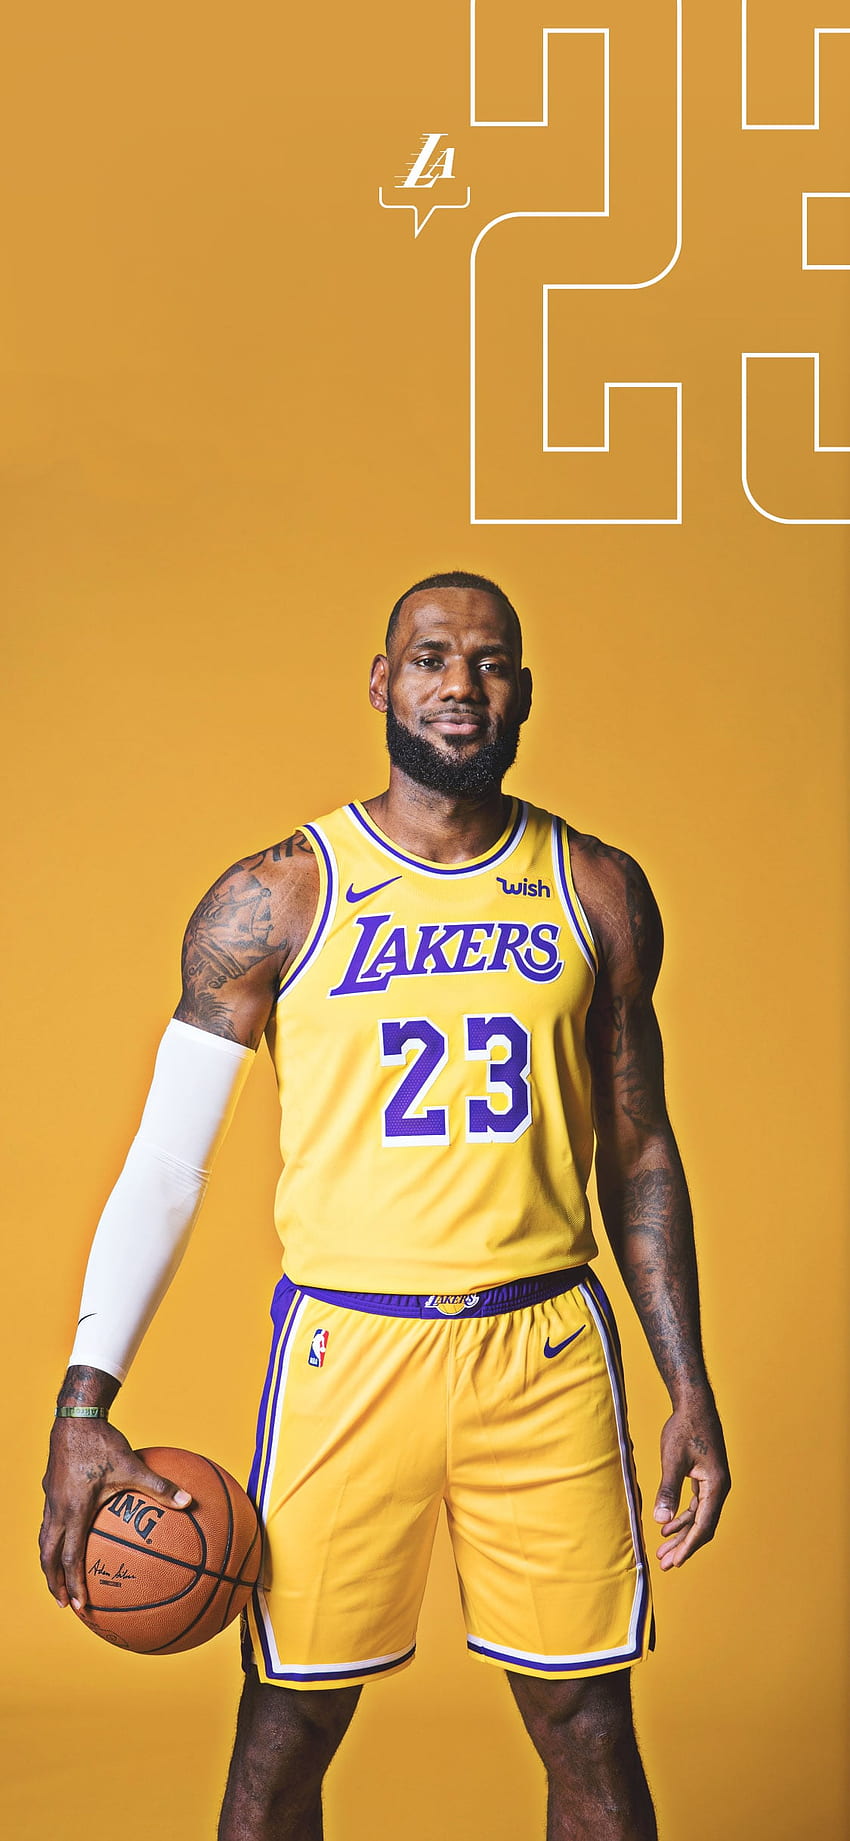 Smiley LeBron James Is Wearing Yellow Sports Dress In Lightning Background  4K HD Sports Wallpapers, HD Wallpapers